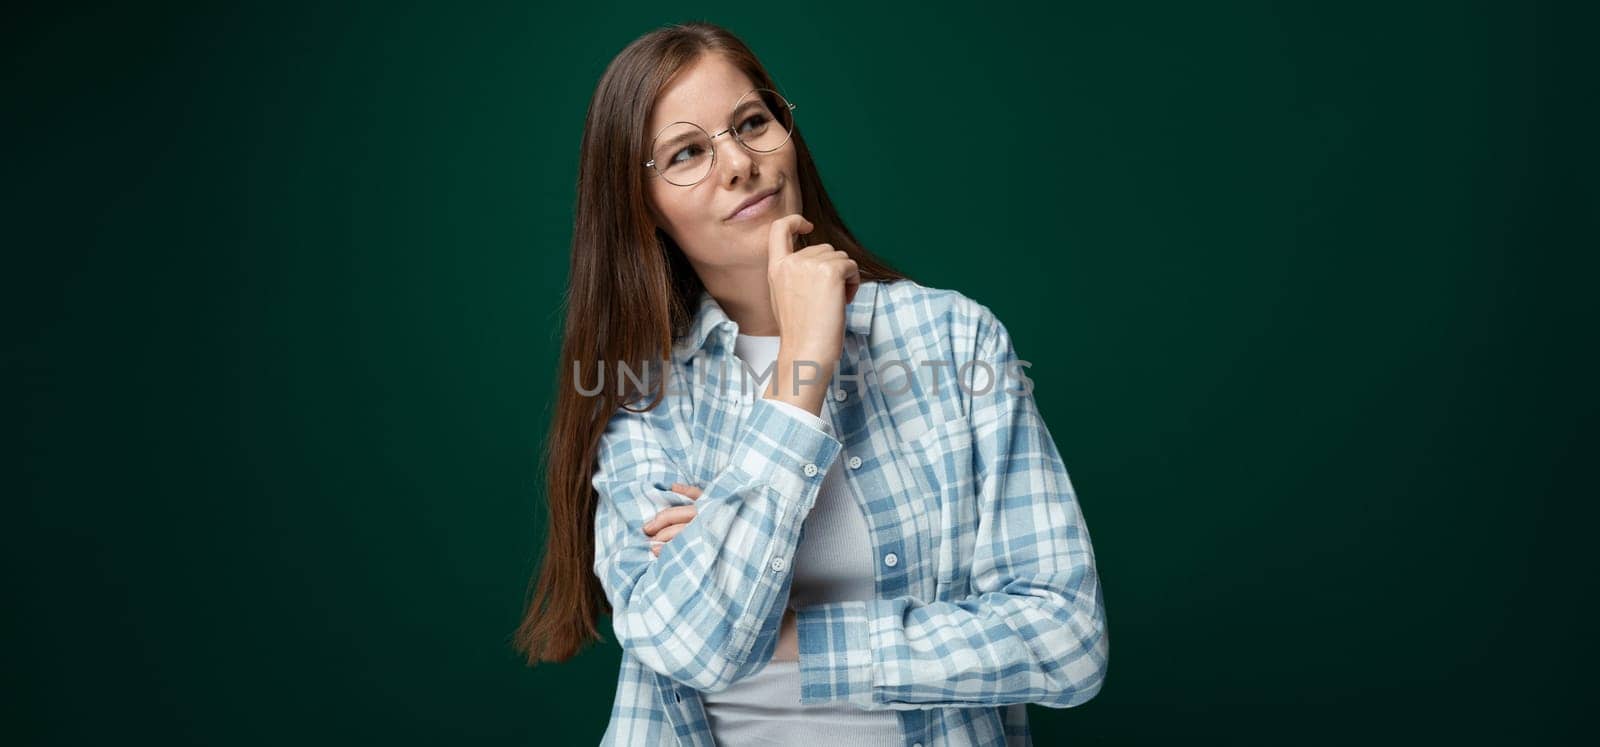 Charming young woman with brown hair thinking on a green background with copy space by TRMK